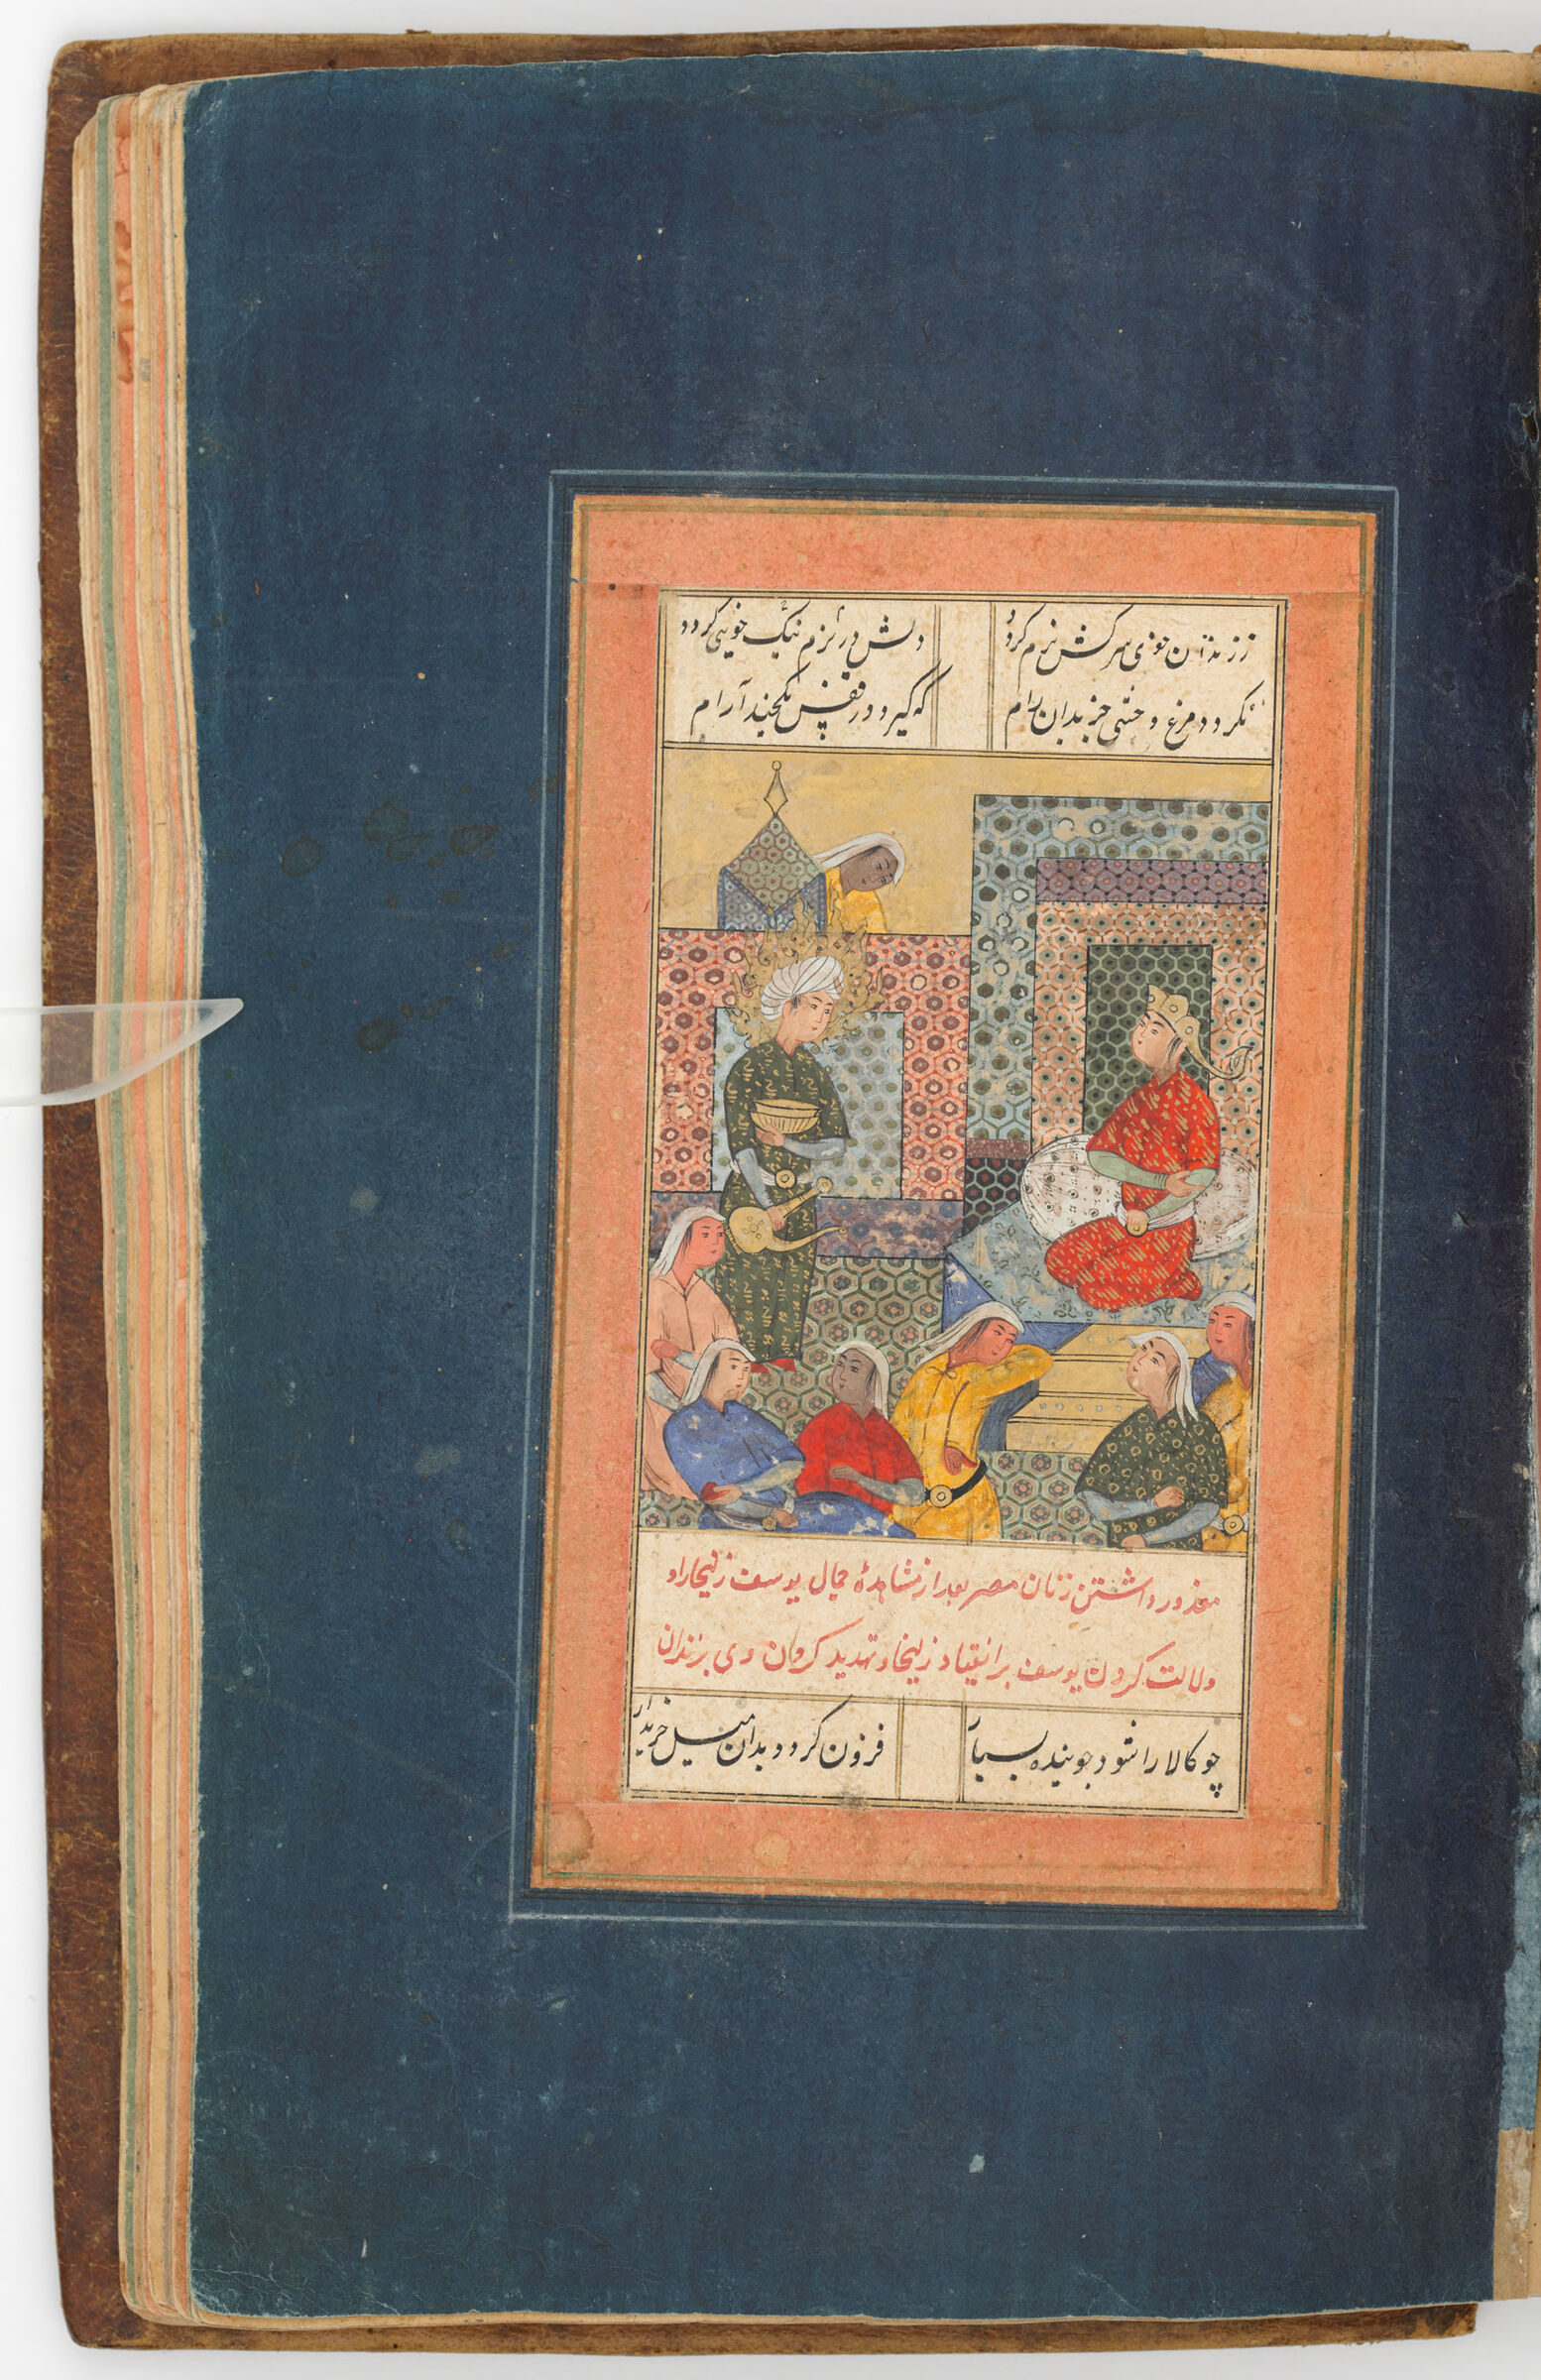 Egyptian Women Overwhelm By Yusuf’s Beauty (Painting Recto; Text Verso Of Folio 90); Illustrated Folio From A Manuscript Of Yusuf And Zulaykha By Nizami